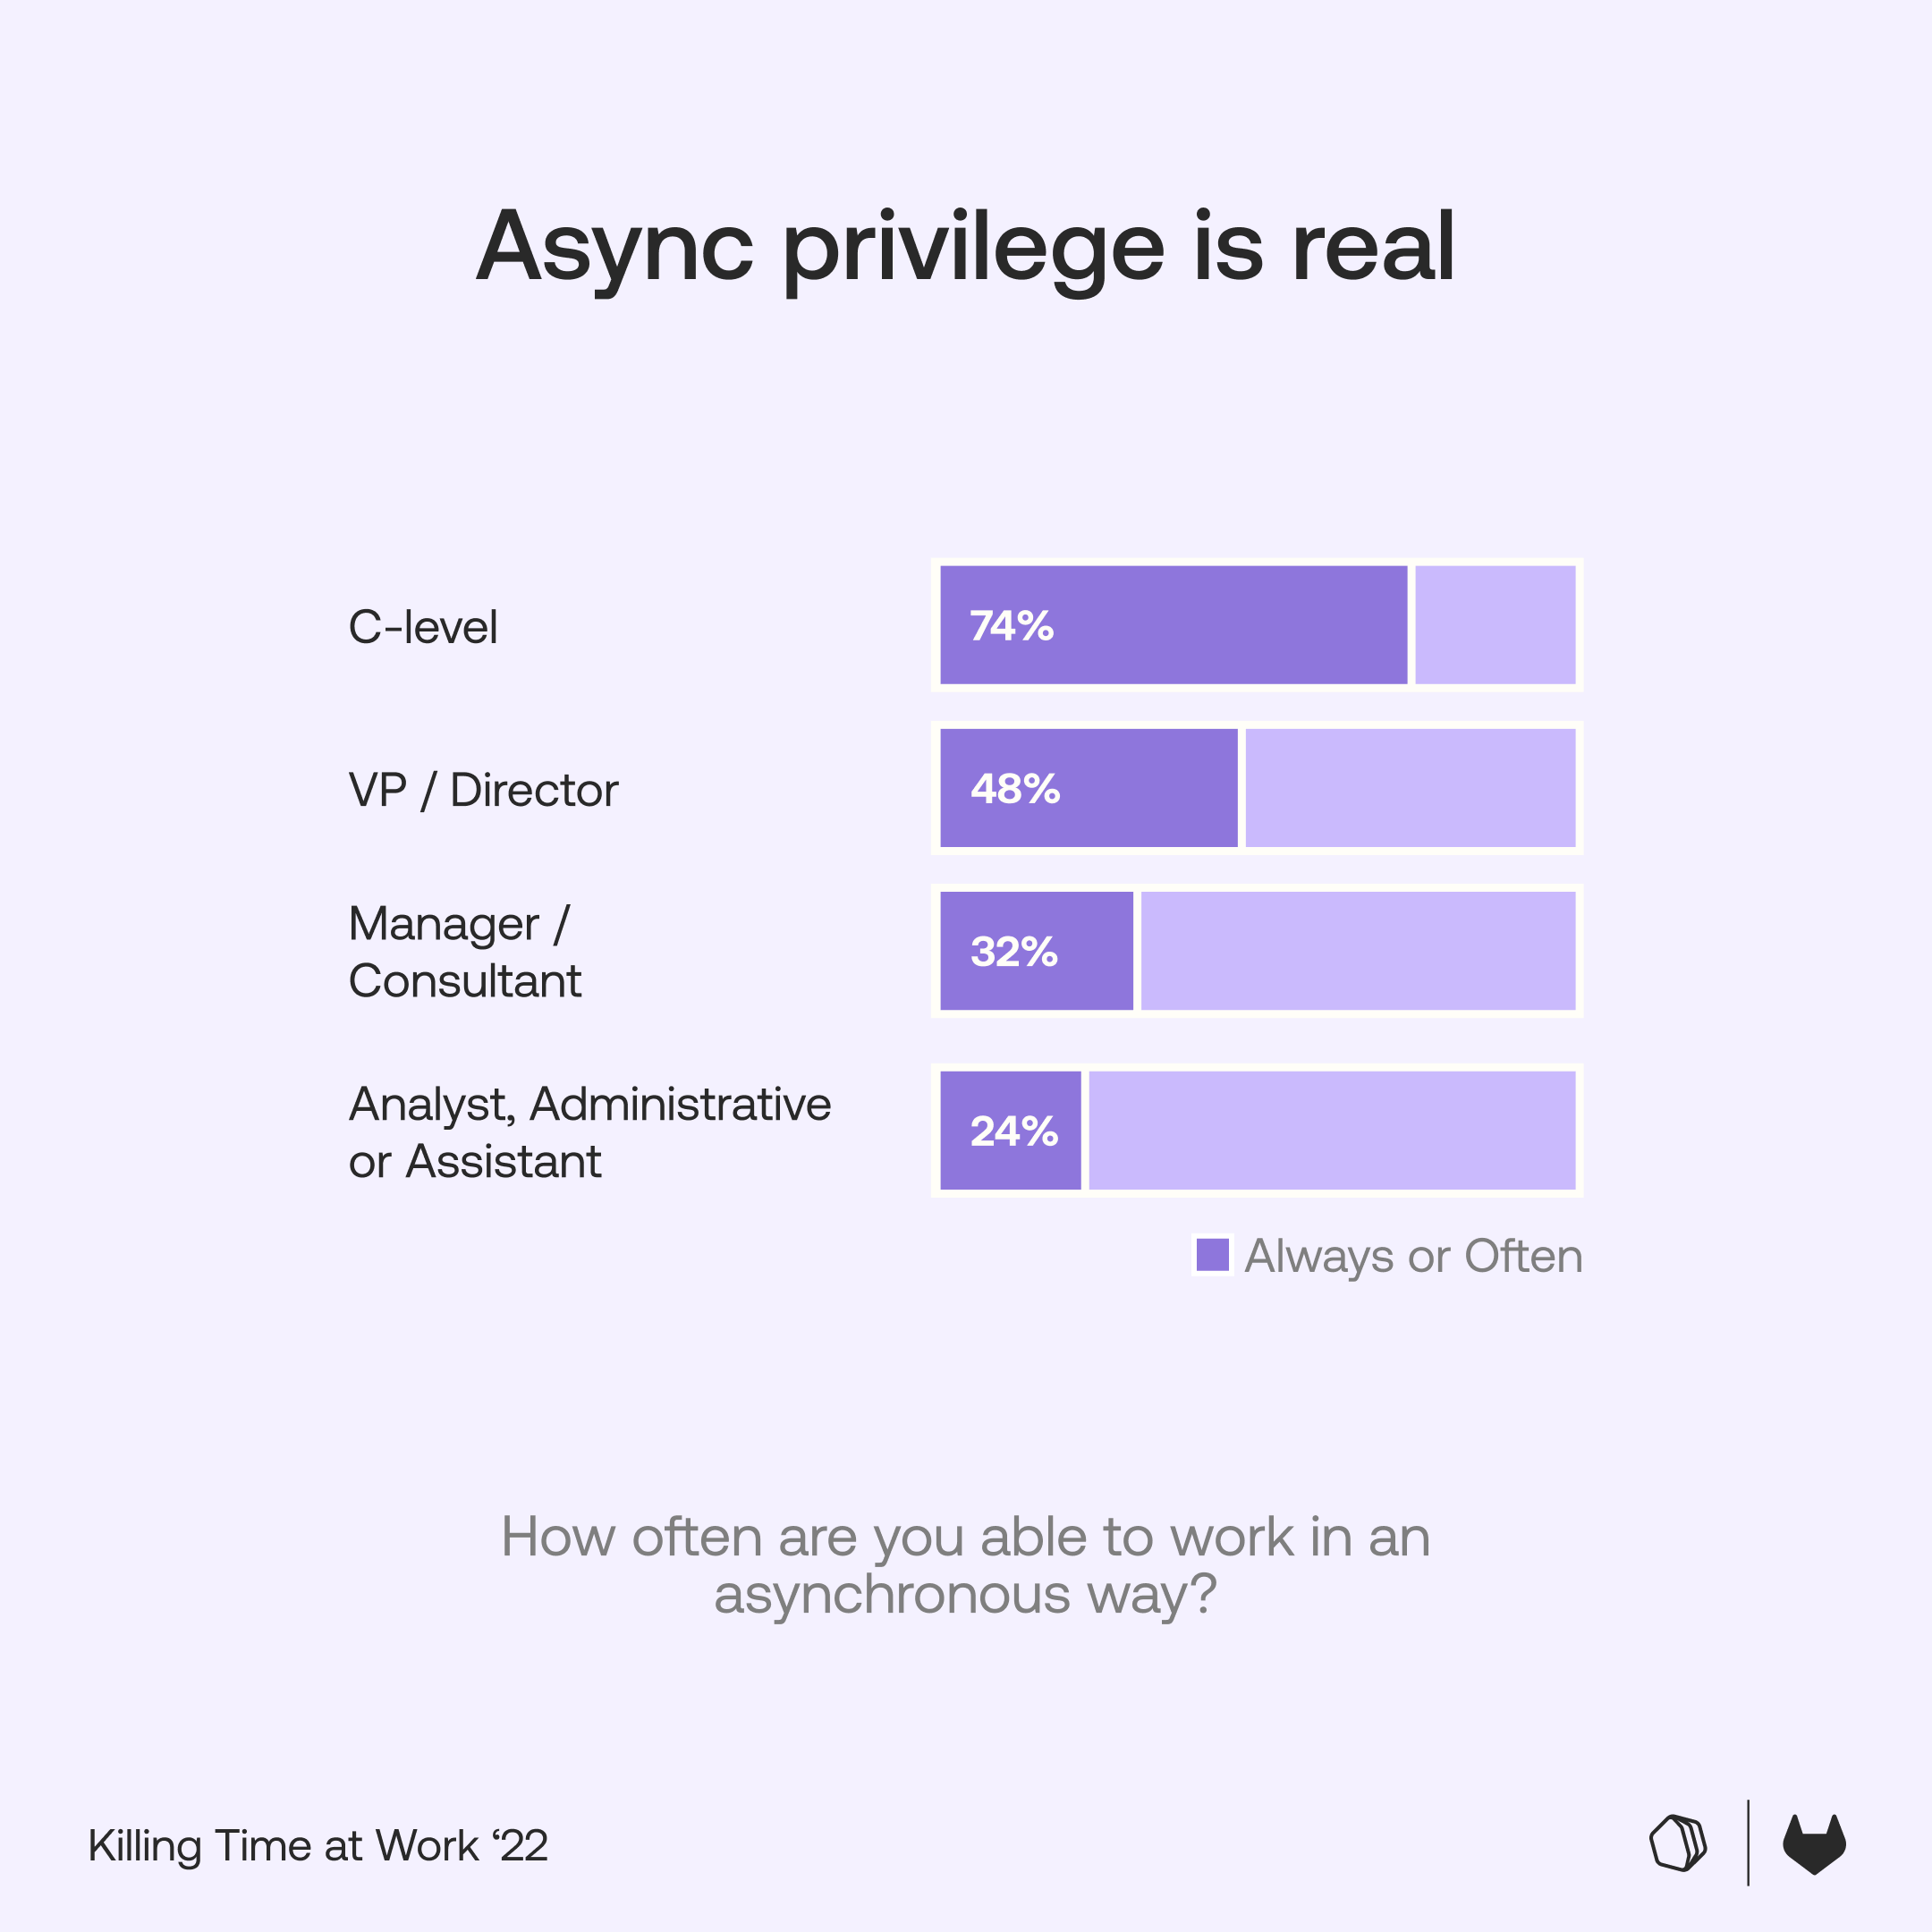 Fellow CEOs: We need to talk about async privilege